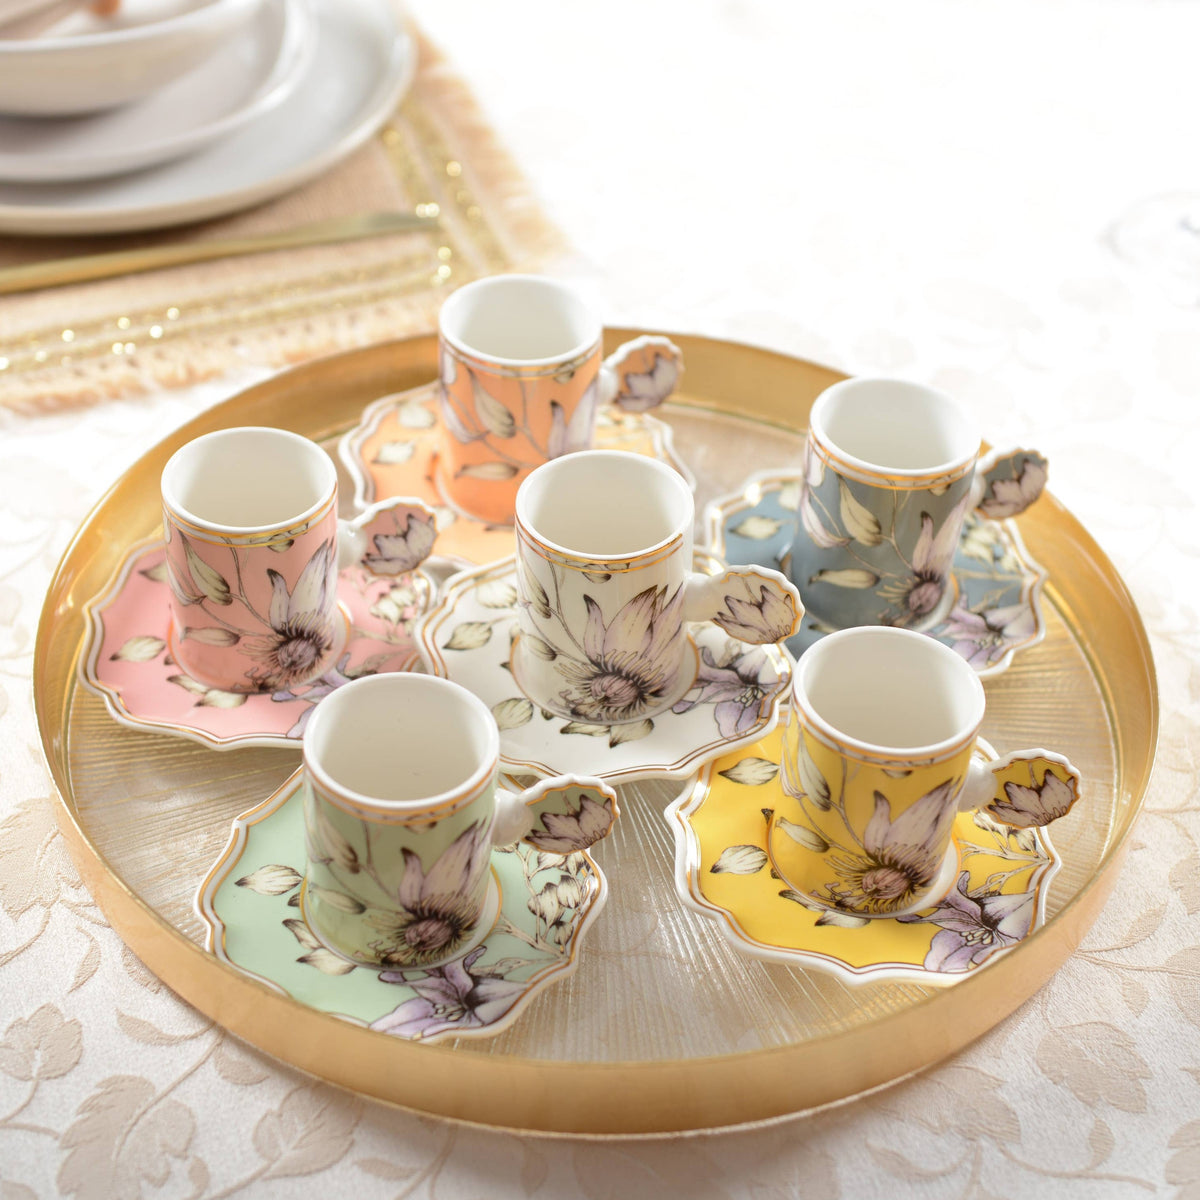 SET OF 6 FLORAL COFFEE CUPS AND SAUCERS - Holistic Habitat 